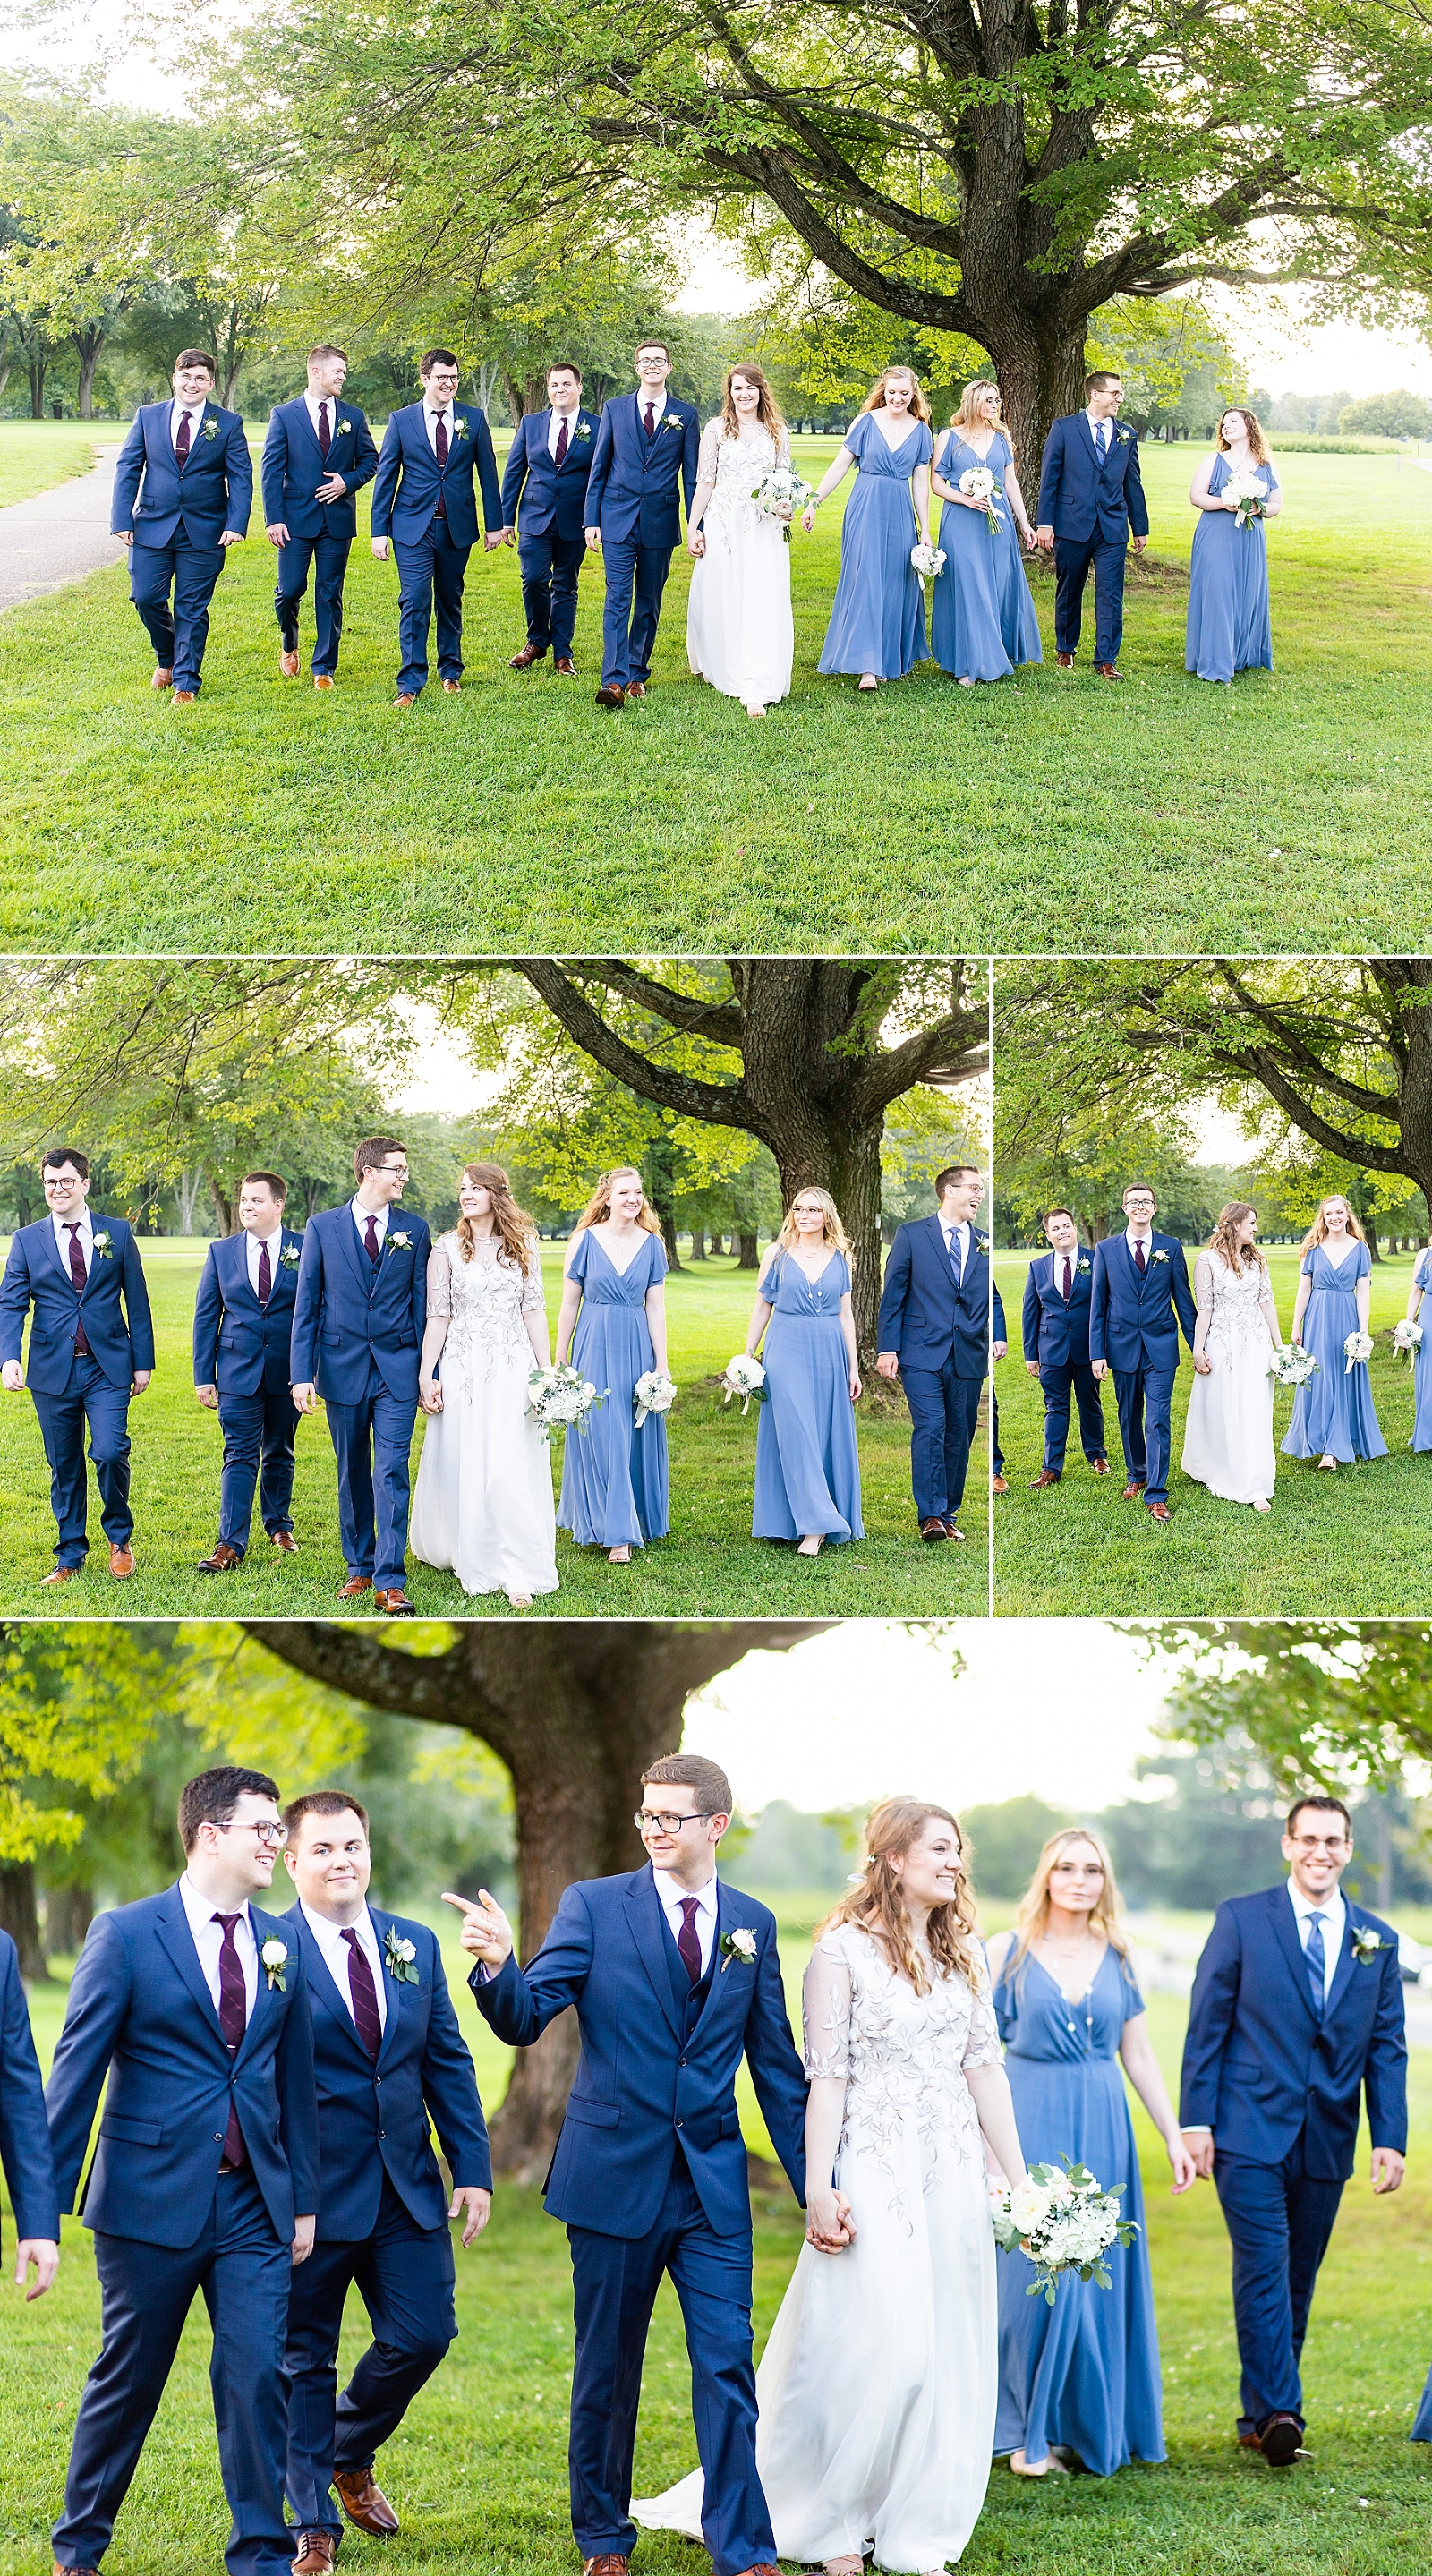 This Woodlands at Algonkian wedding in Sterling, Virginia was just GORGEOUS!! Their day was full of beautiful lighting, gold accent decorations, yummy food and desserts, and handmade wedding dresses and florals! To view the full wedding, click: https://bethanievetter.com/hannah-michael-woodlands-at-algonkian-wedding. Complete with blue suits, a handmade wedding dress, stunning flower arrangements. Photographed by Bethanie Vetter Photography LLC. #WoodlandsAtAlgonkian #WoodlandsAtAlgonkianWedding #TheWoodlandsAtAlgonkian #SummerWedding #August #WeddingPhotos #WeddingPhotography #BethanieVetterWeddings